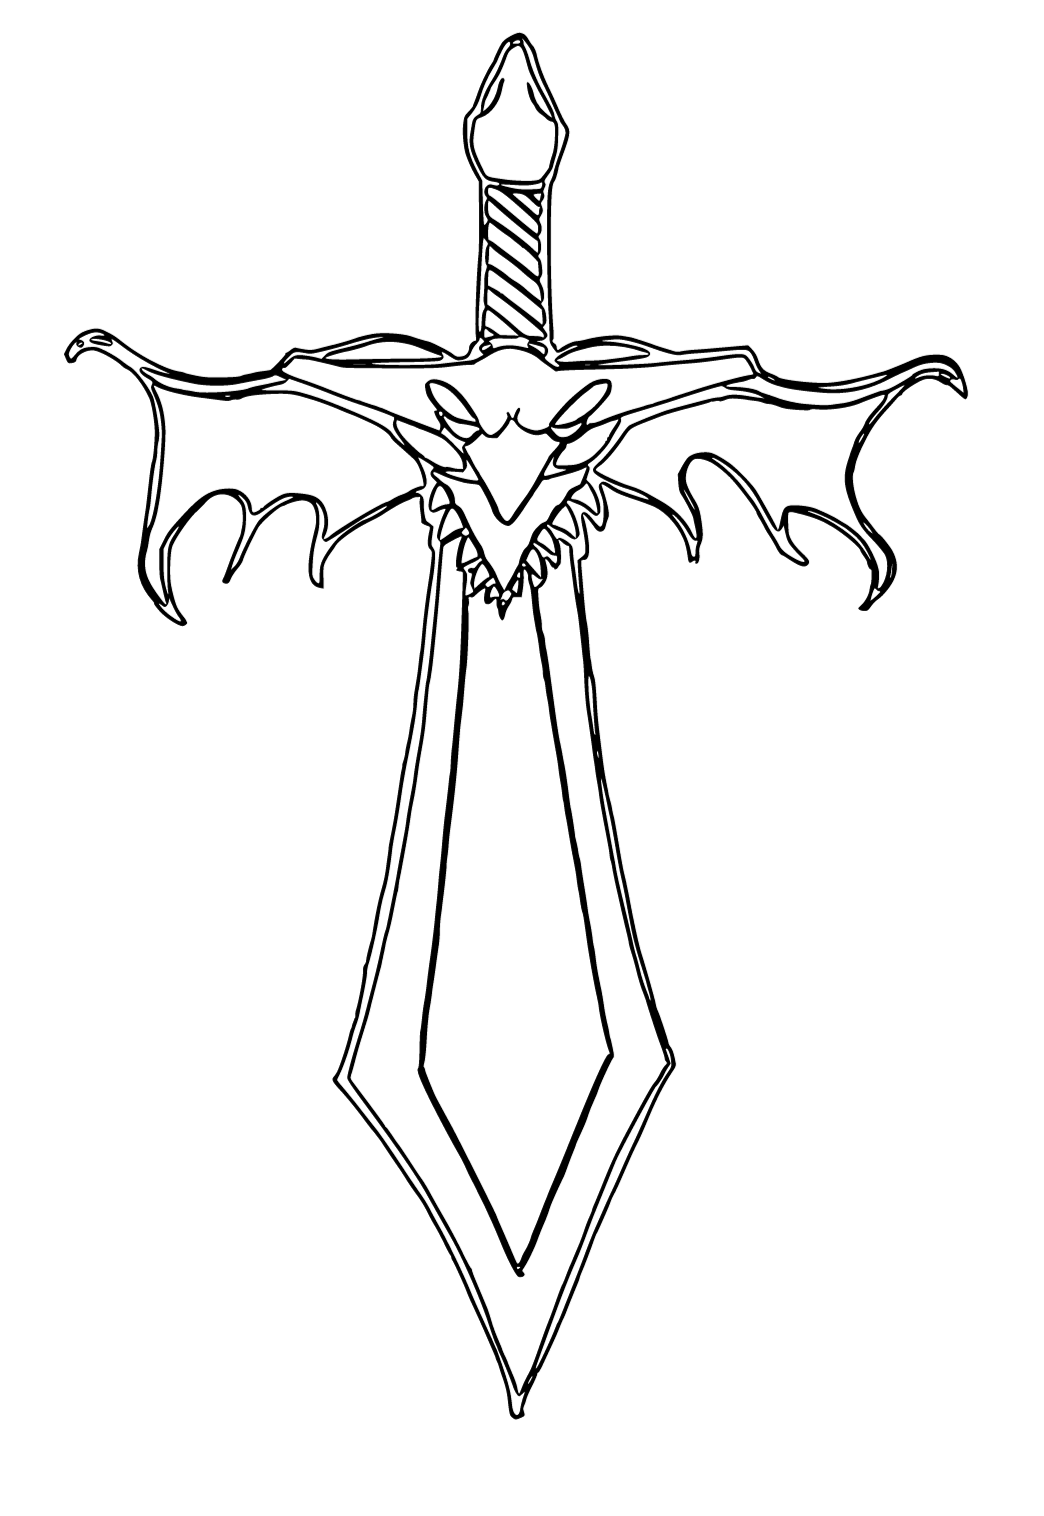 Free printable sword unusual coloring page for adults and kids